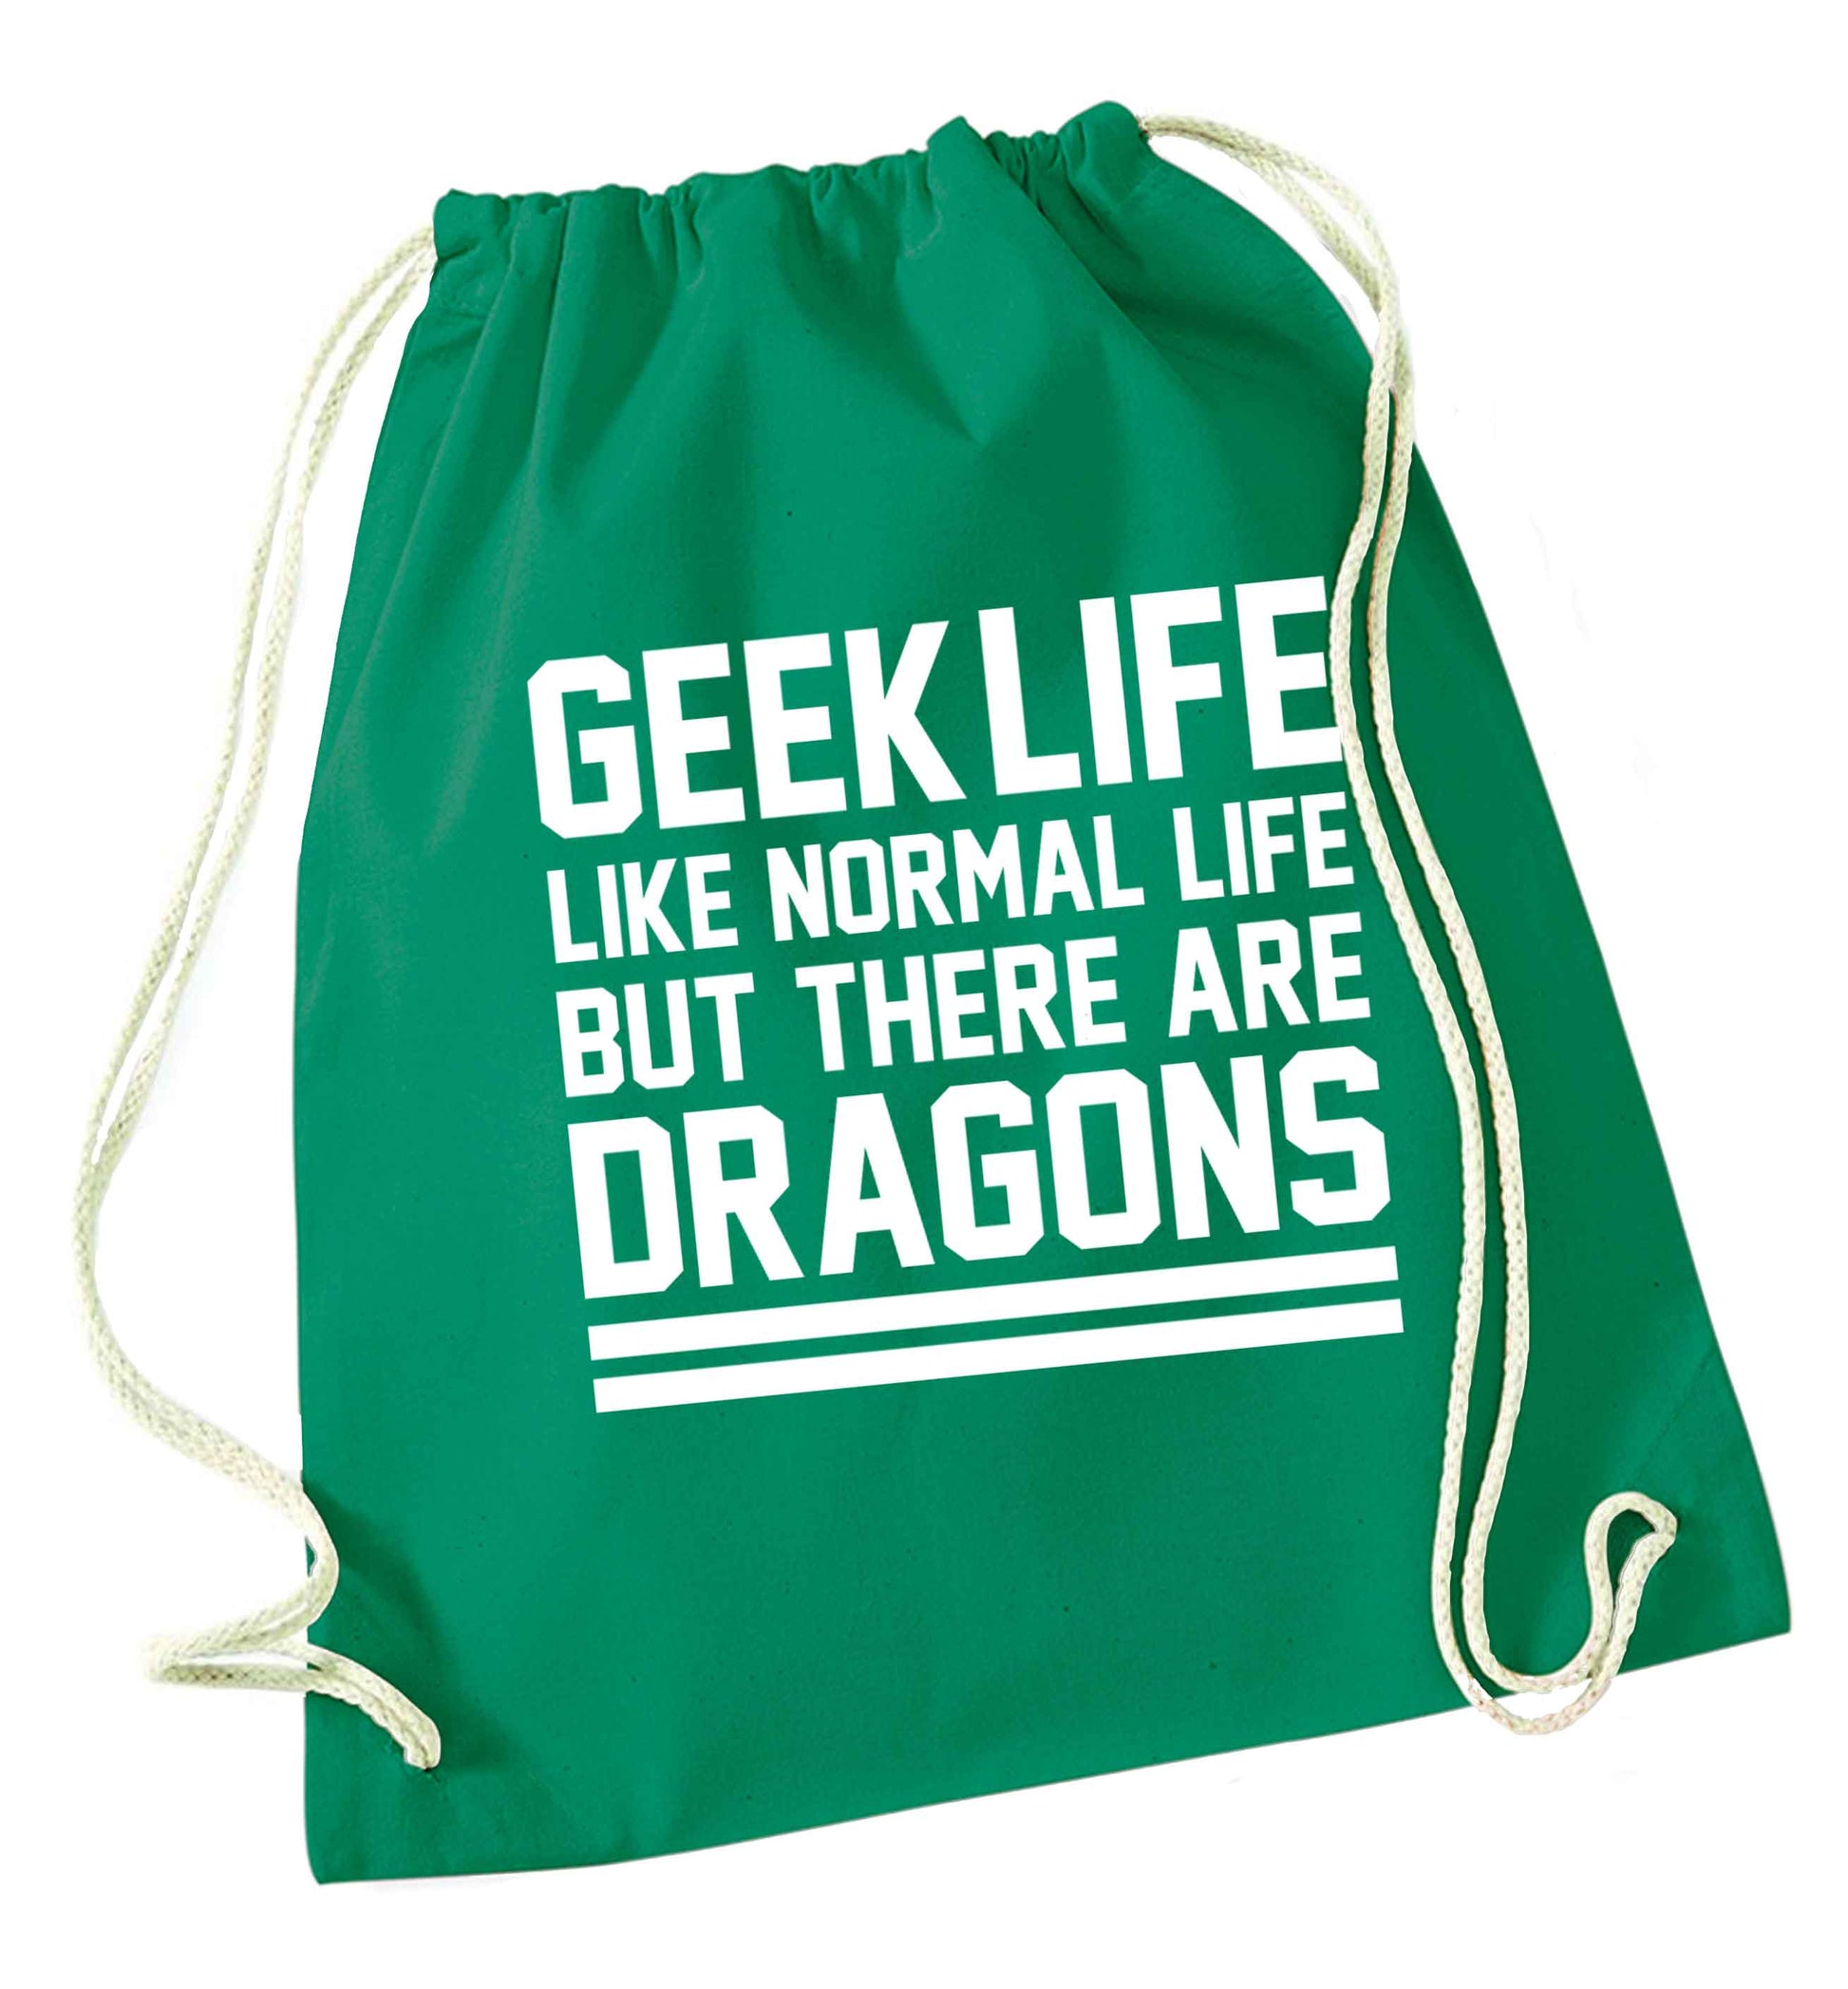 Geek life like normal life but there are dragons green drawstring bag